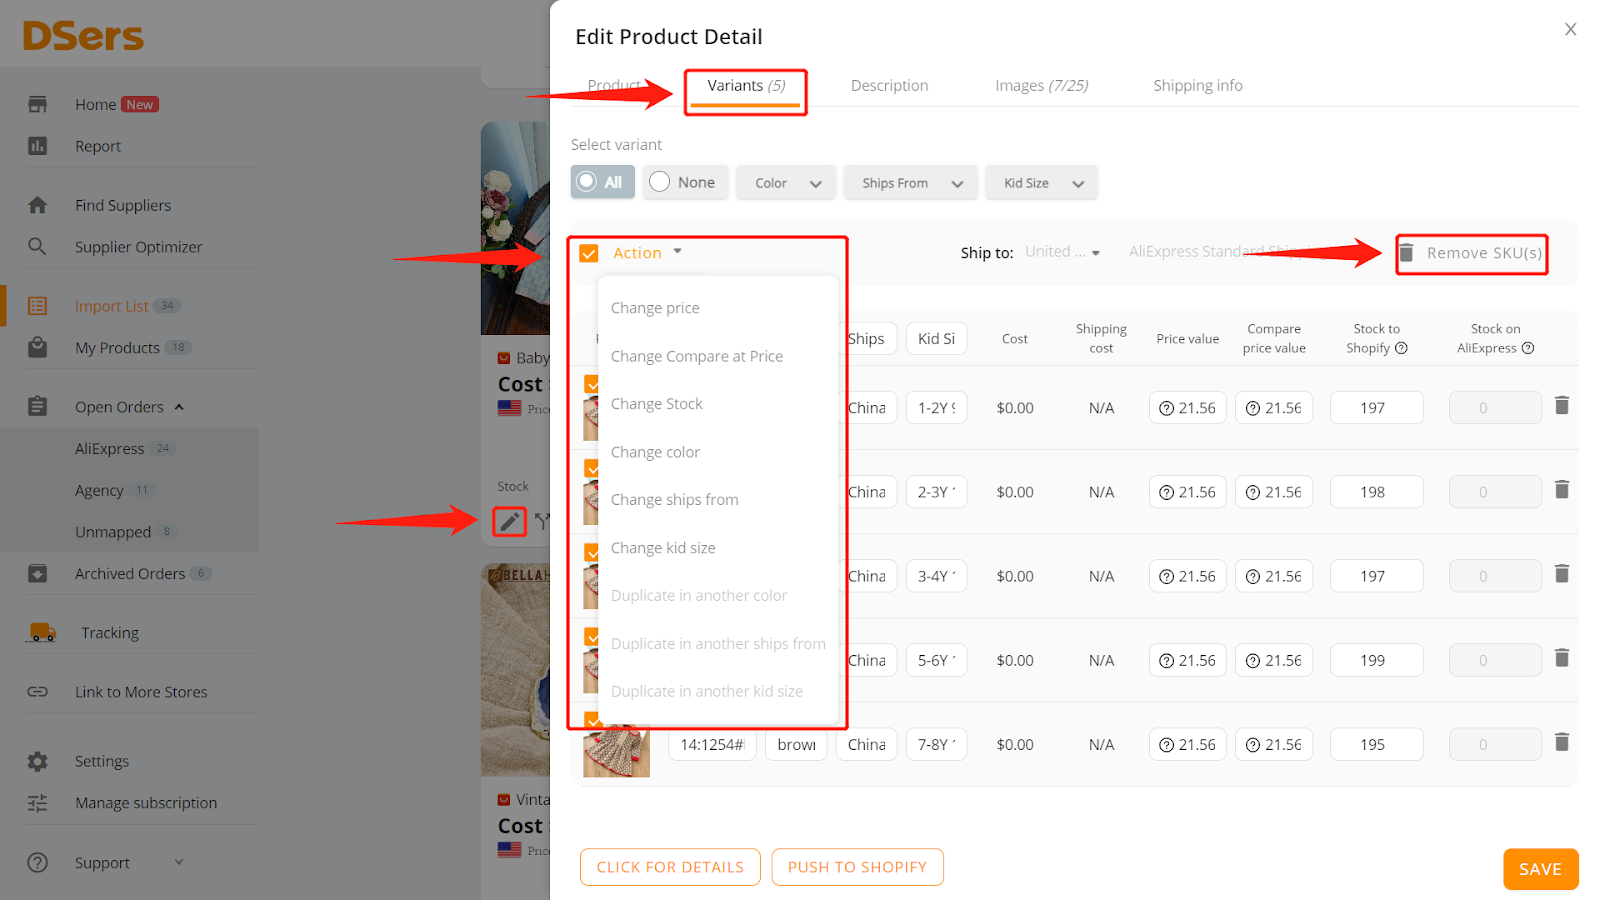 DSers Customization Tools - Bulk-manage Product Variants Selling Details - DSers